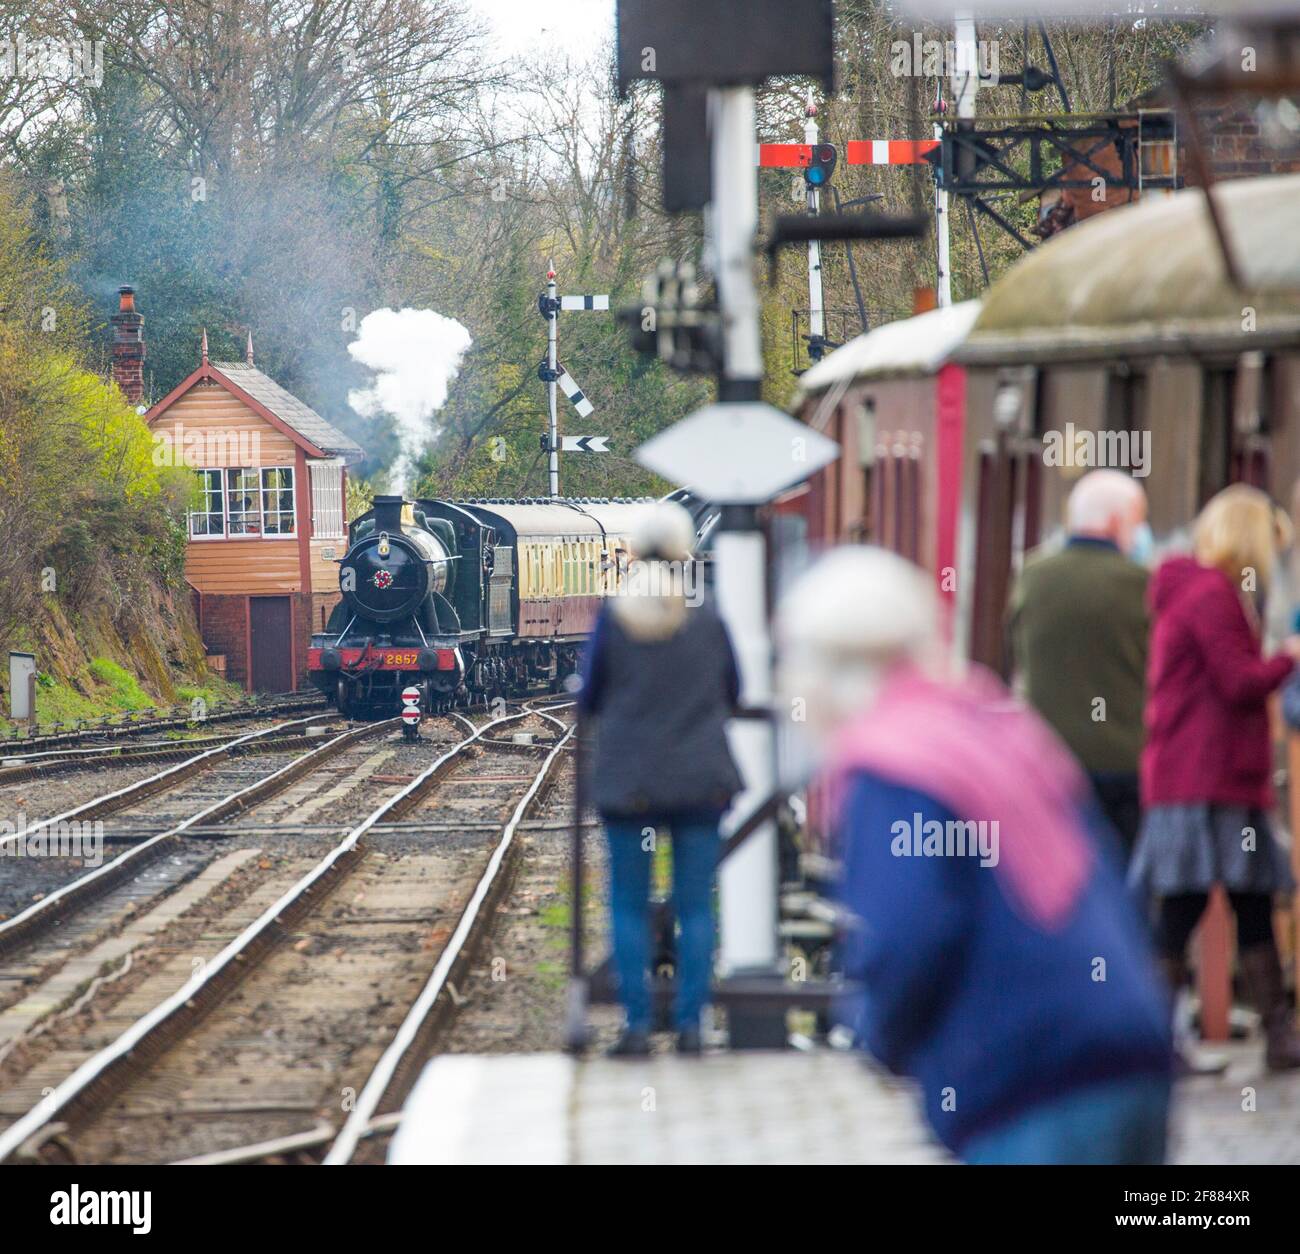 Bewdley, UK. 12th April, 2021. It's full steam ahead on the Severn Valley Railway as this heritage railway reopens following the easing of lockdown restrictions today. Vintage steam locomotive 2857 is seen here arriving at Bewdley station pulling a packed train behind her, the cab crew absolutely delighted to be 'back on track', driving this magnificent engine who has already clocked up over 100 years of railway service. Credit: Lee Hudson/Alamy Live News Stock Photo